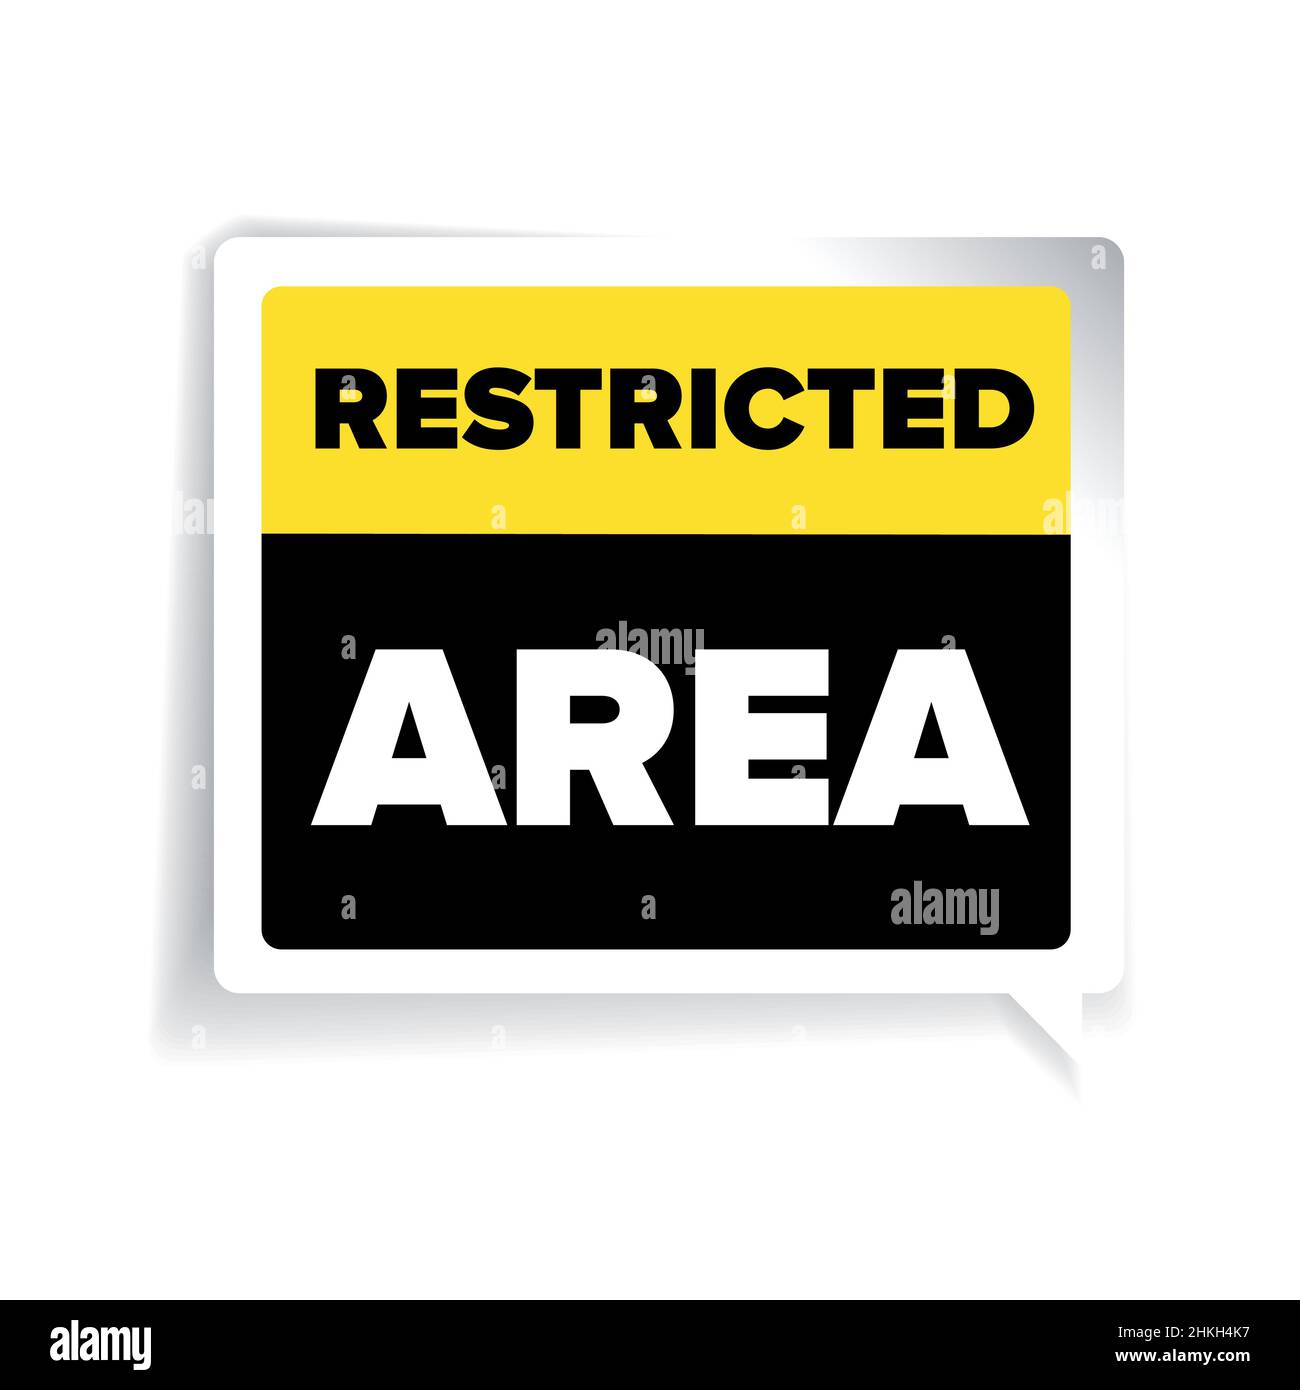 Restricted area warning sign vector Stock Vector